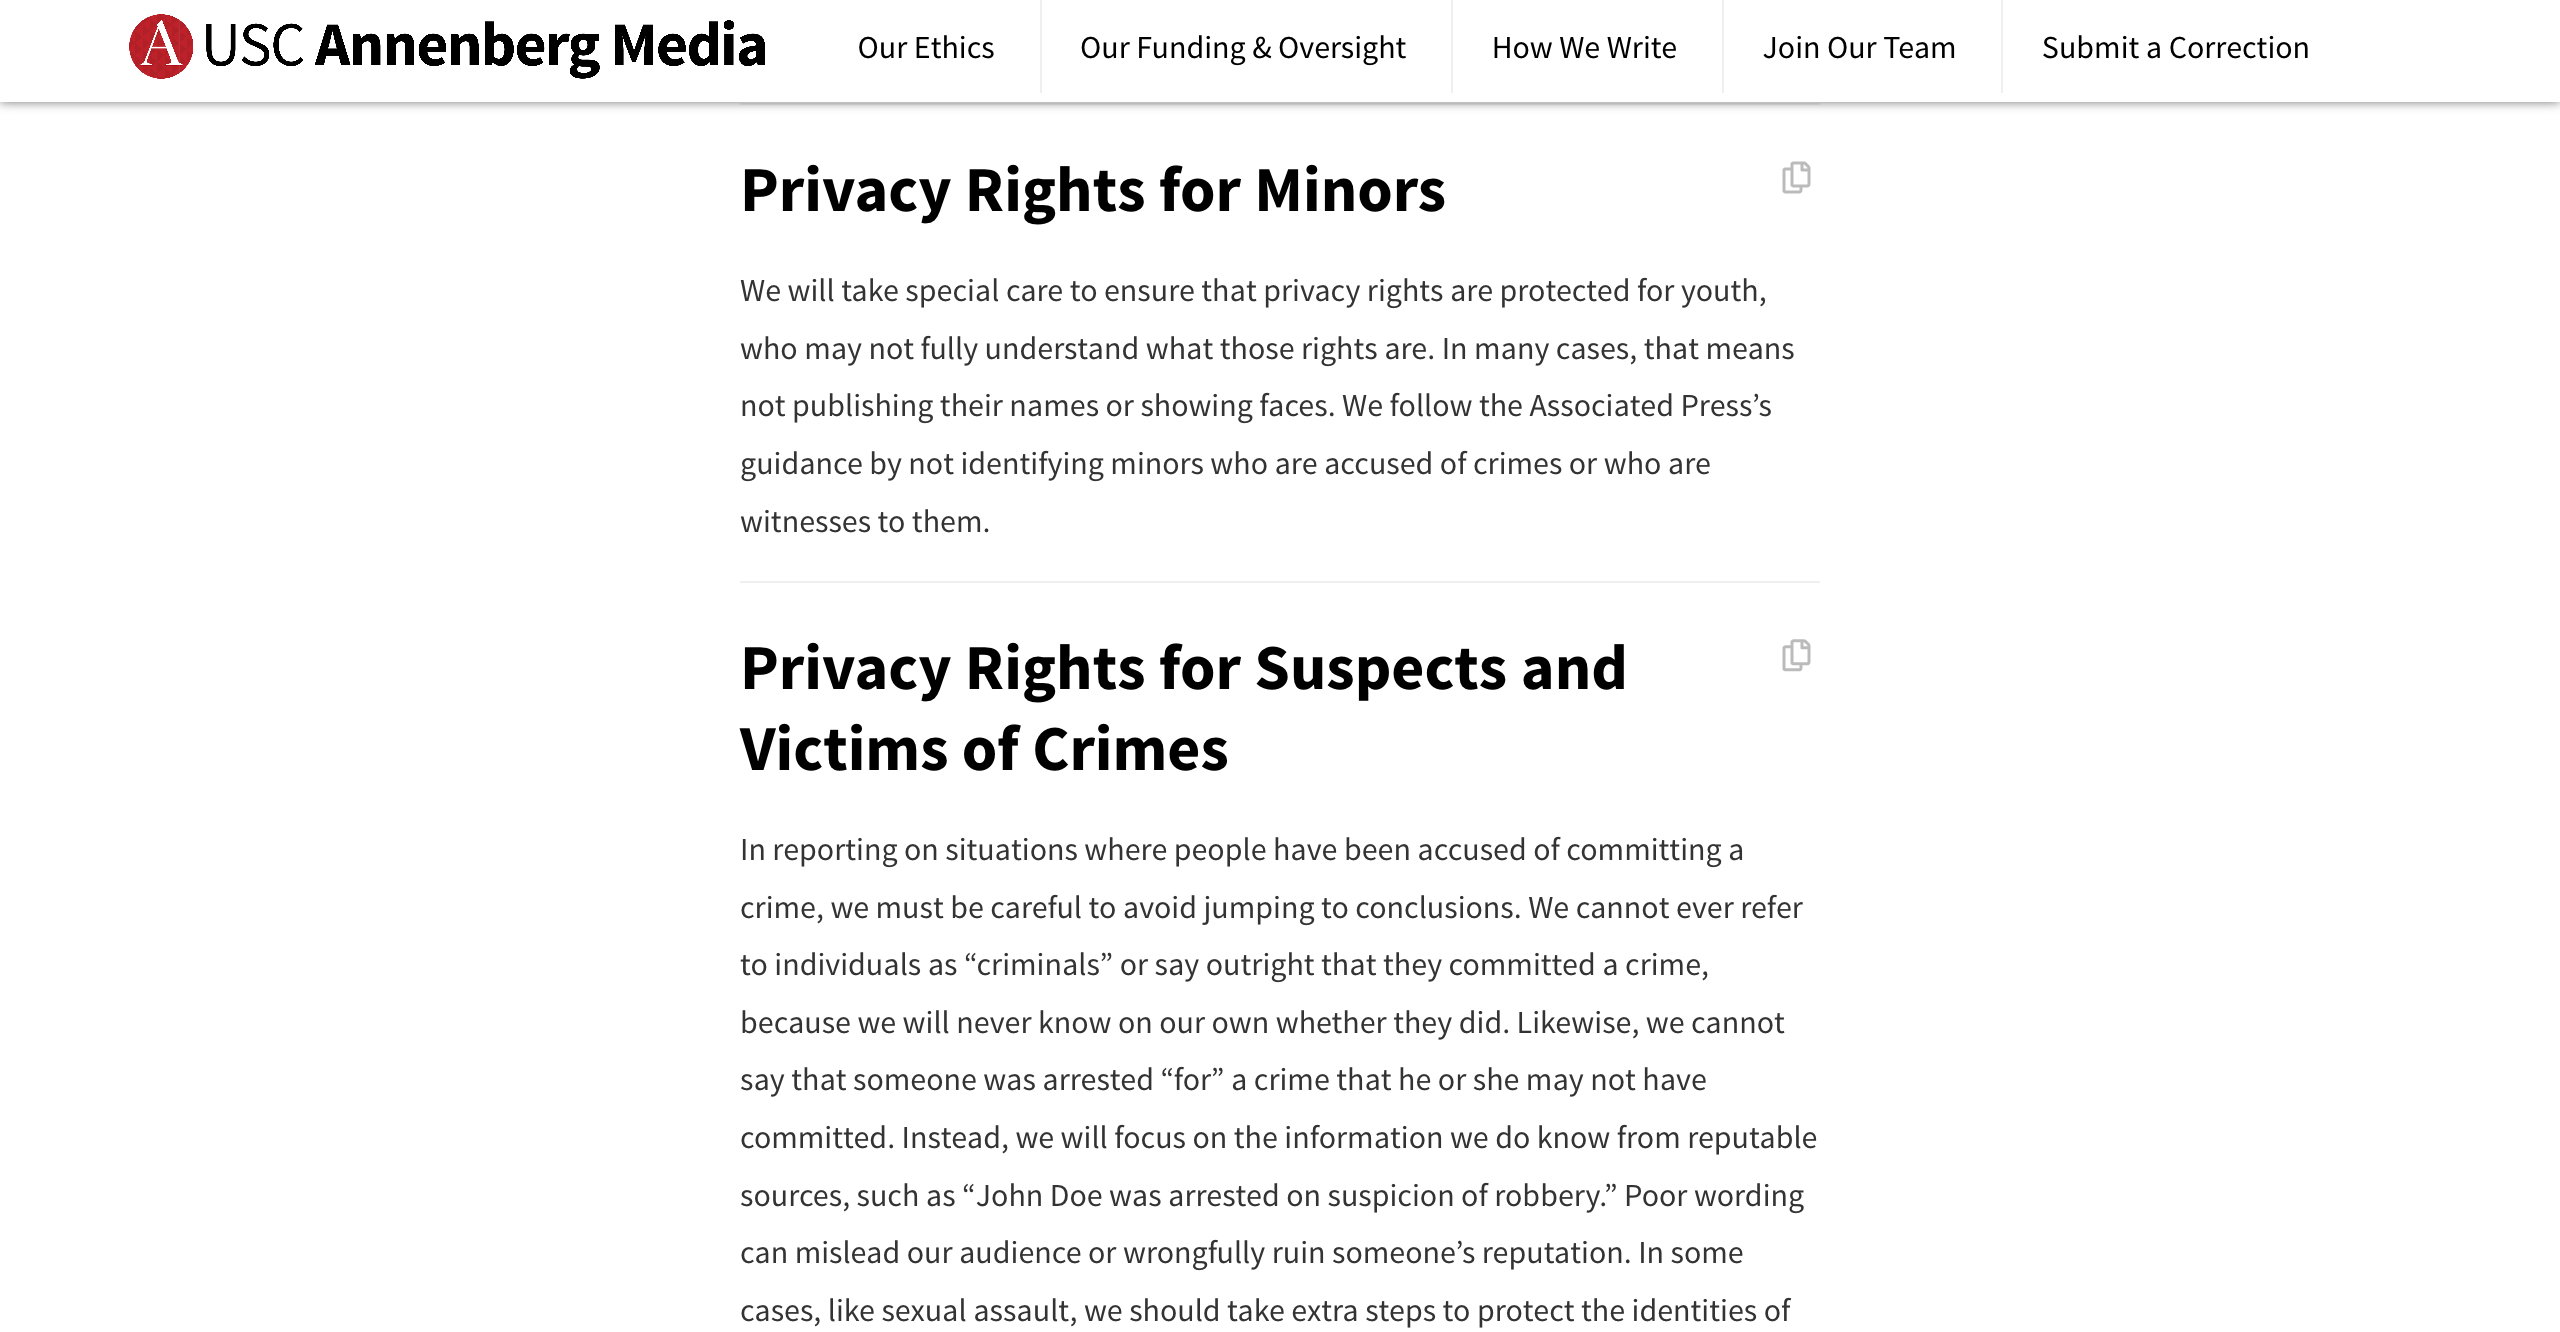 A screenshot of the ethics policies webpage, including the policies on privacy rights.